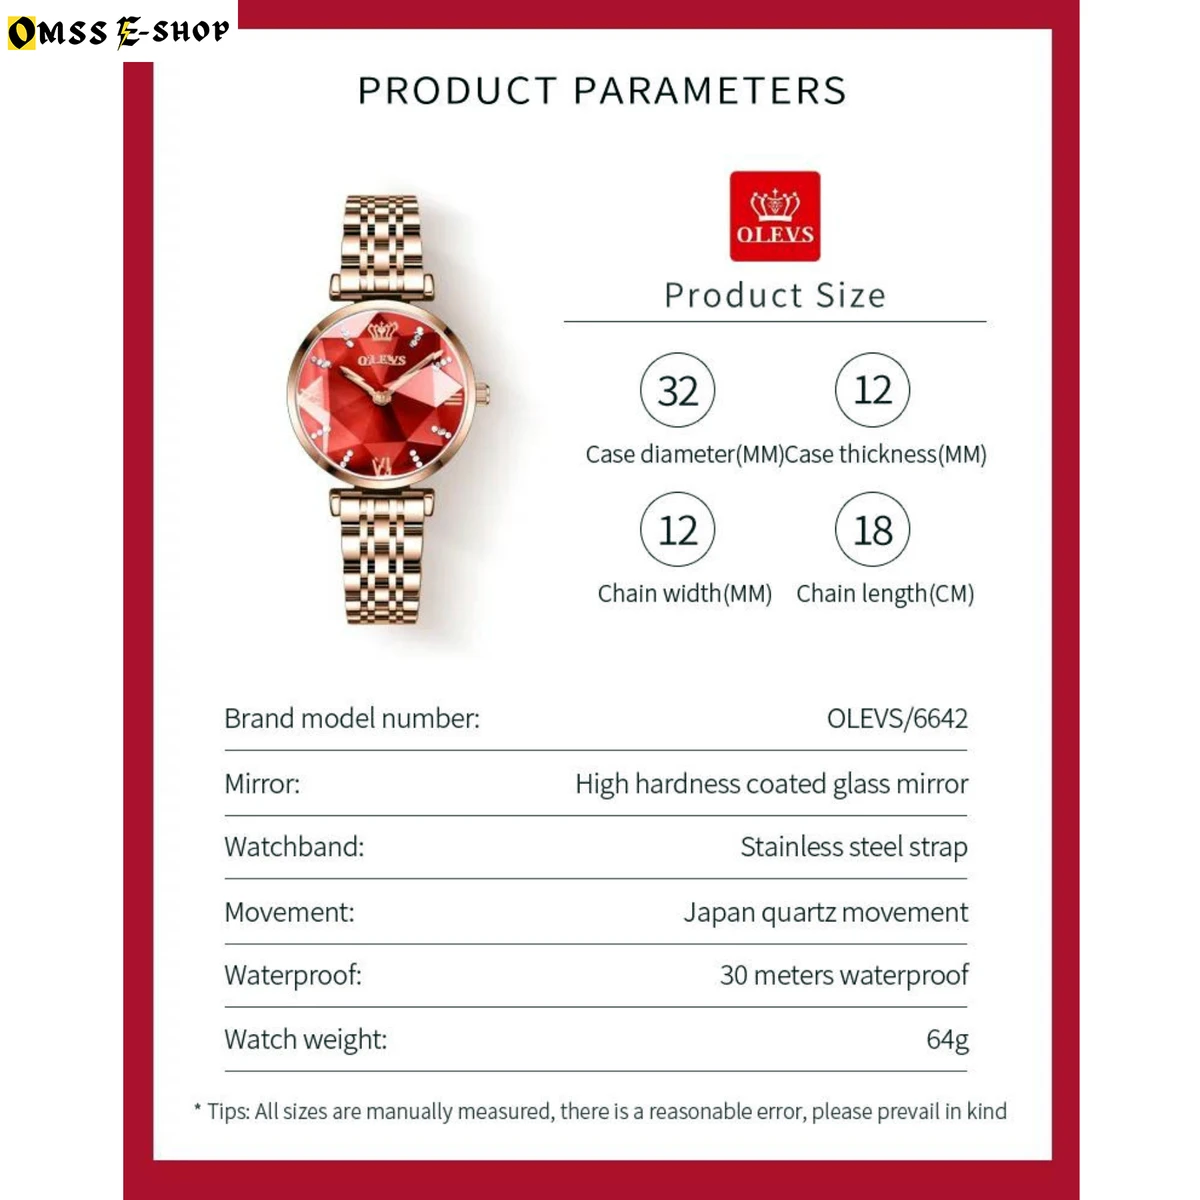 OLEVS 6642 Elegant Green, Pearl White, Style Red Analog Quartz Waterproof Luxury Watch for Women RP-1250DH-RE